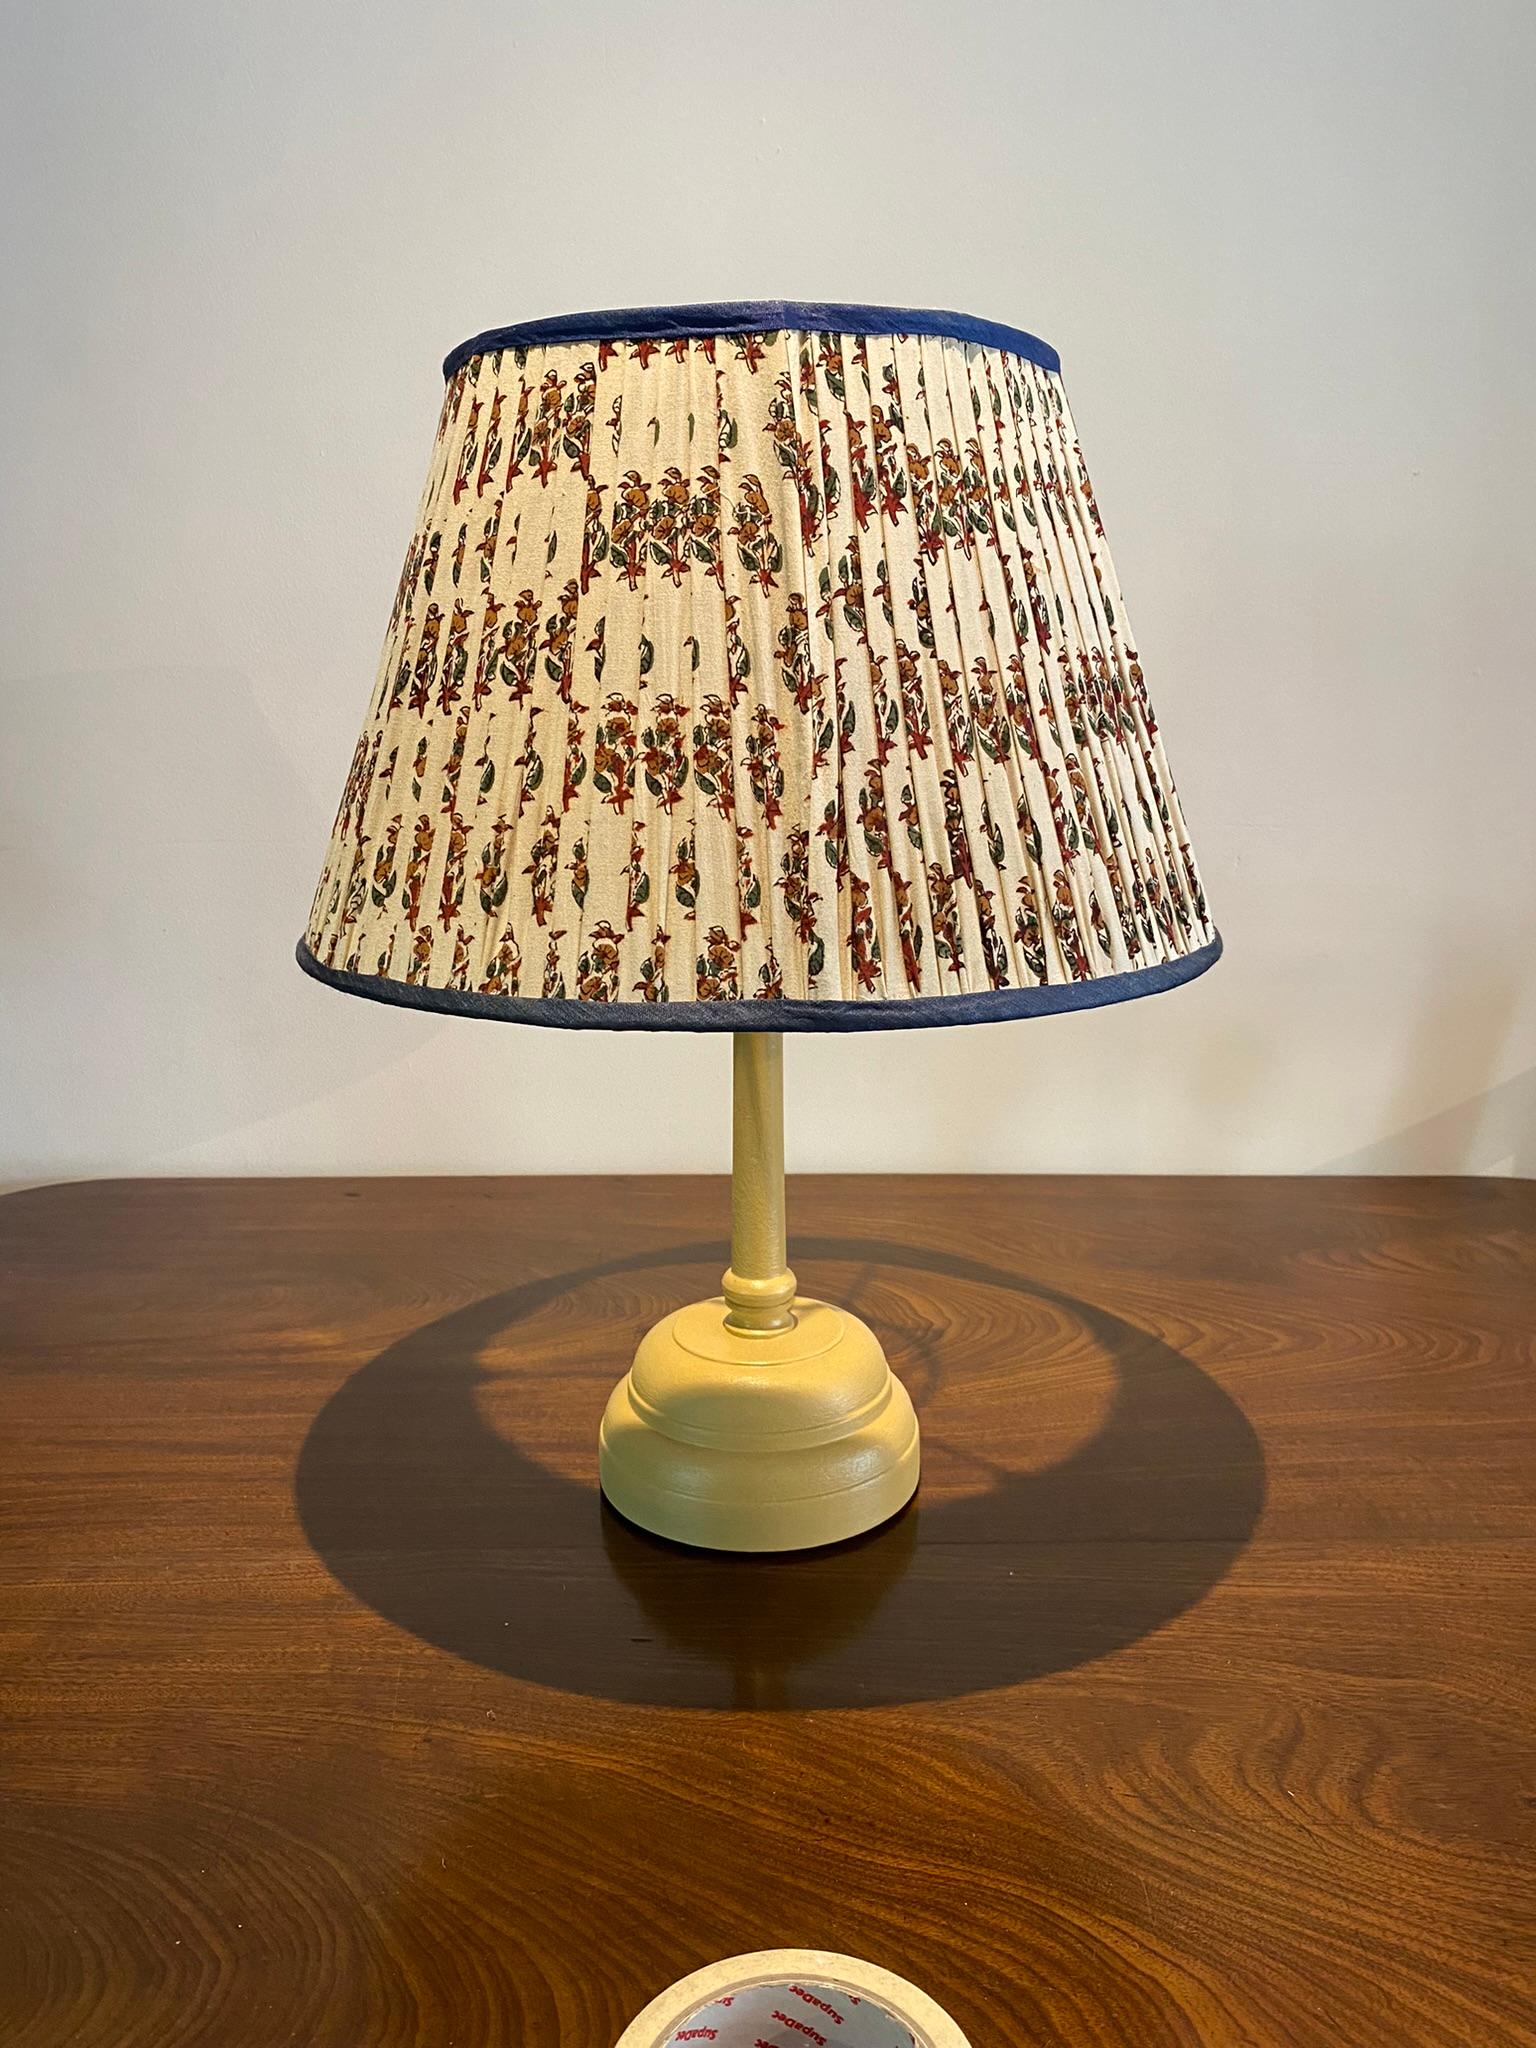 16” Indian Sari lampshade with Duplex Fitting.

These are handmade lampshades made from Indian sari silks and cotton.

Due to the fact these shades are on display in my showroom and their delicate nature, they occasionally show signs of handling